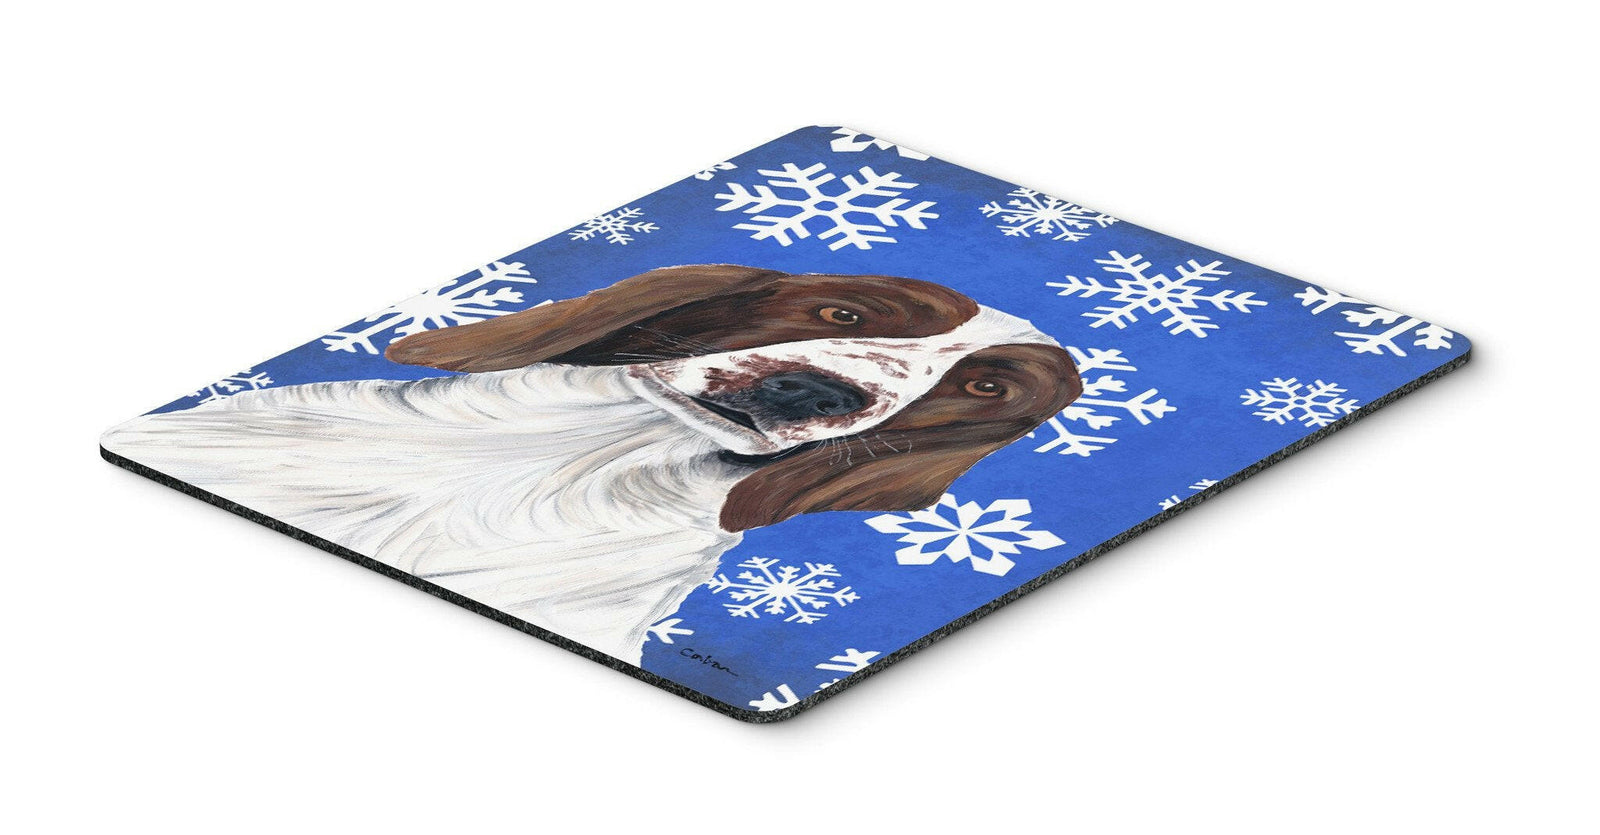 Welsh Springer Spaniel Winter Snowflakes Holiday Mouse Pad, Hot Pad or Trivet by Caroline's Treasures